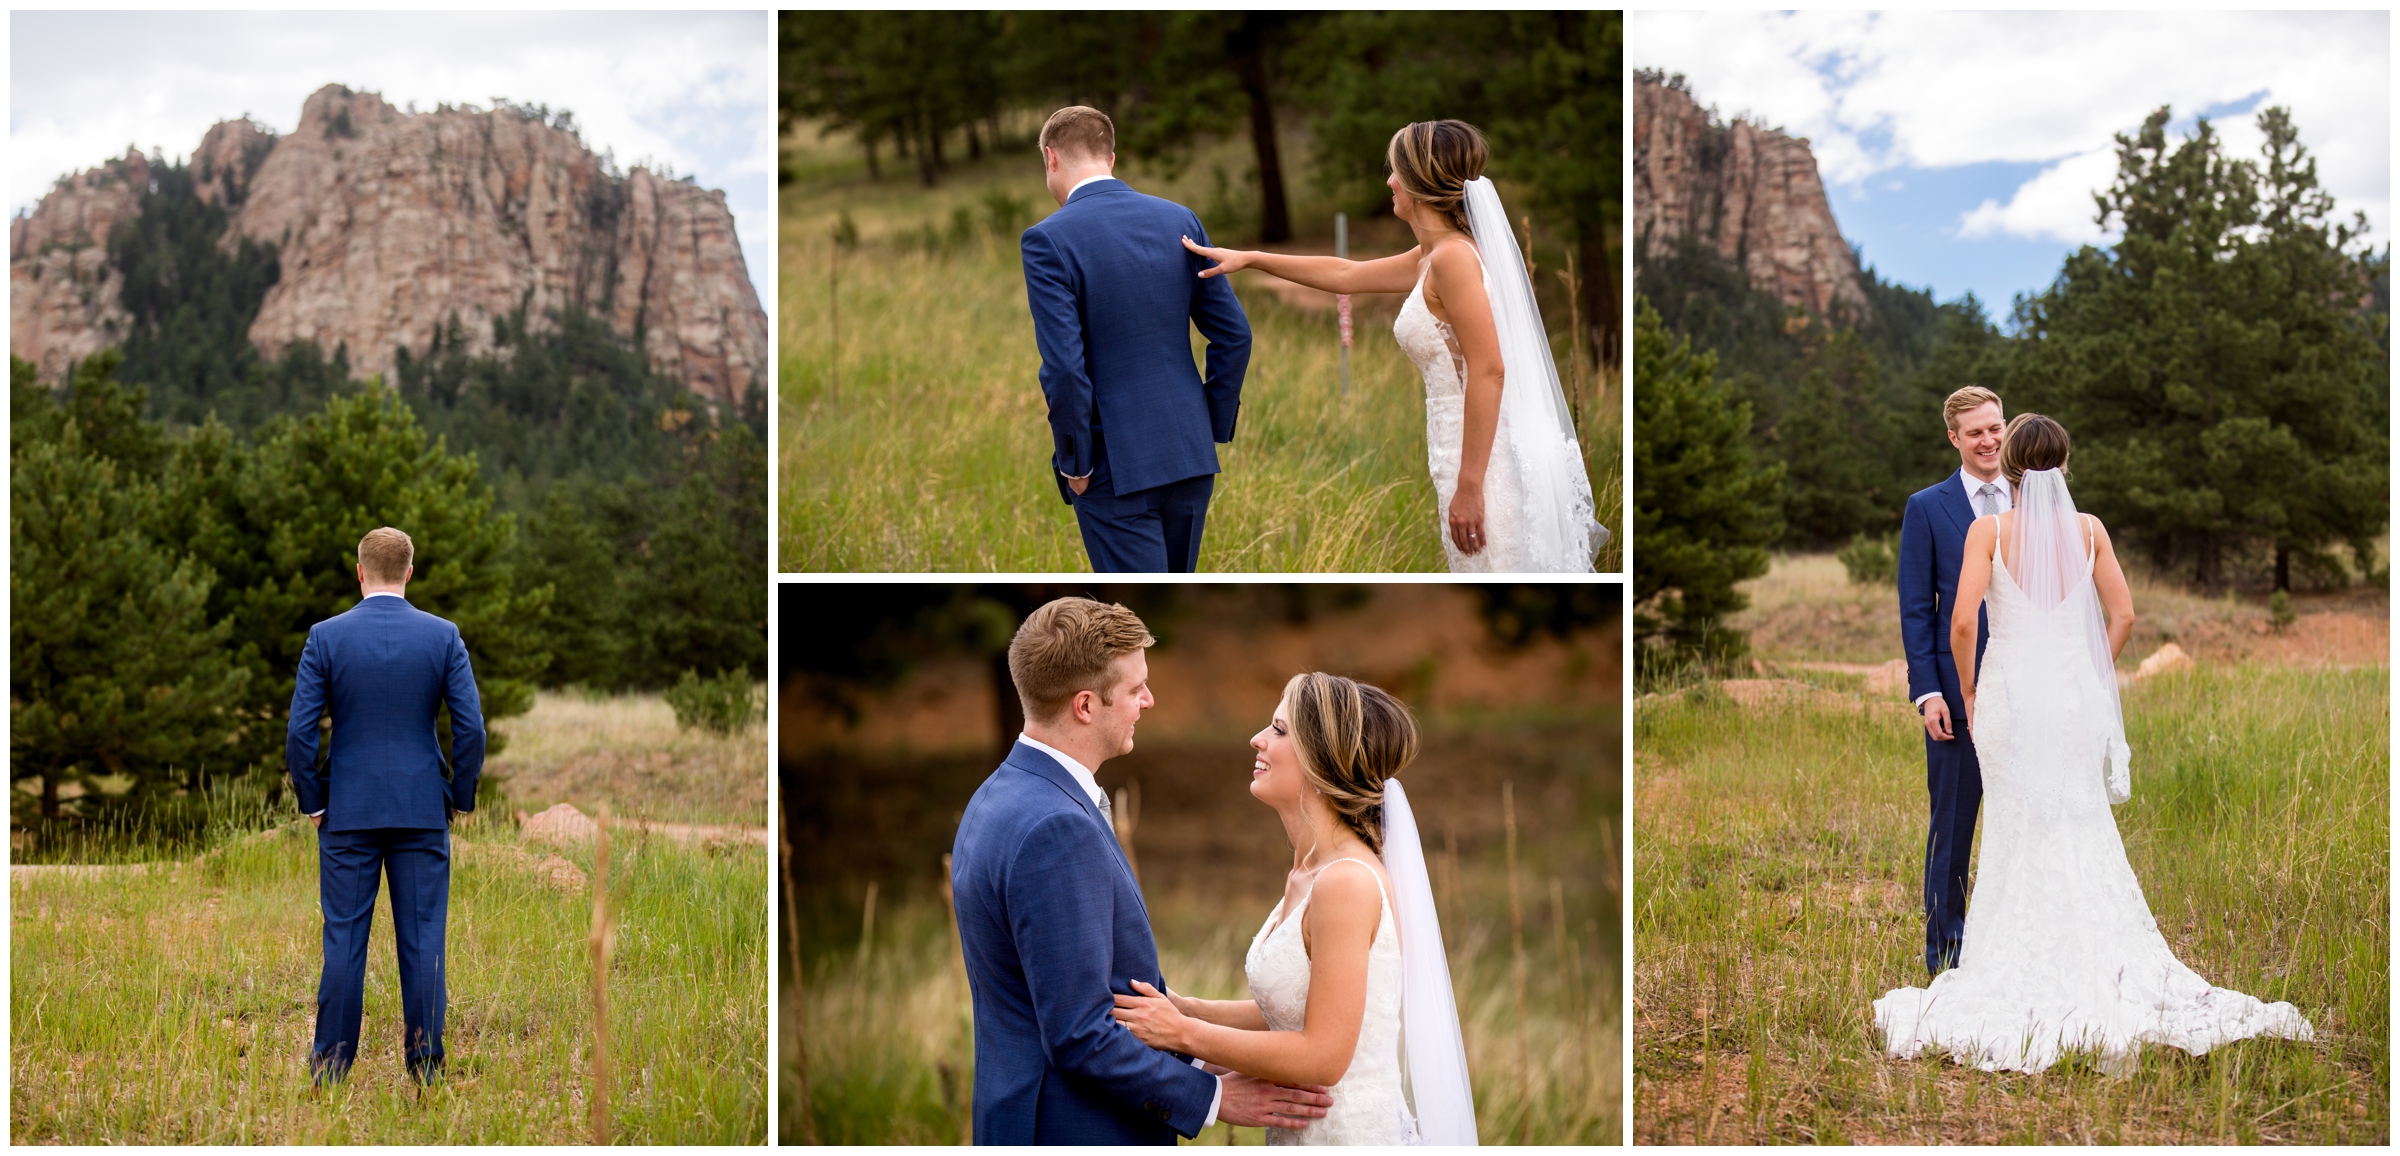 bride and groom first look during Colorado mountain wedding at Mountain View ranch wedgewood 